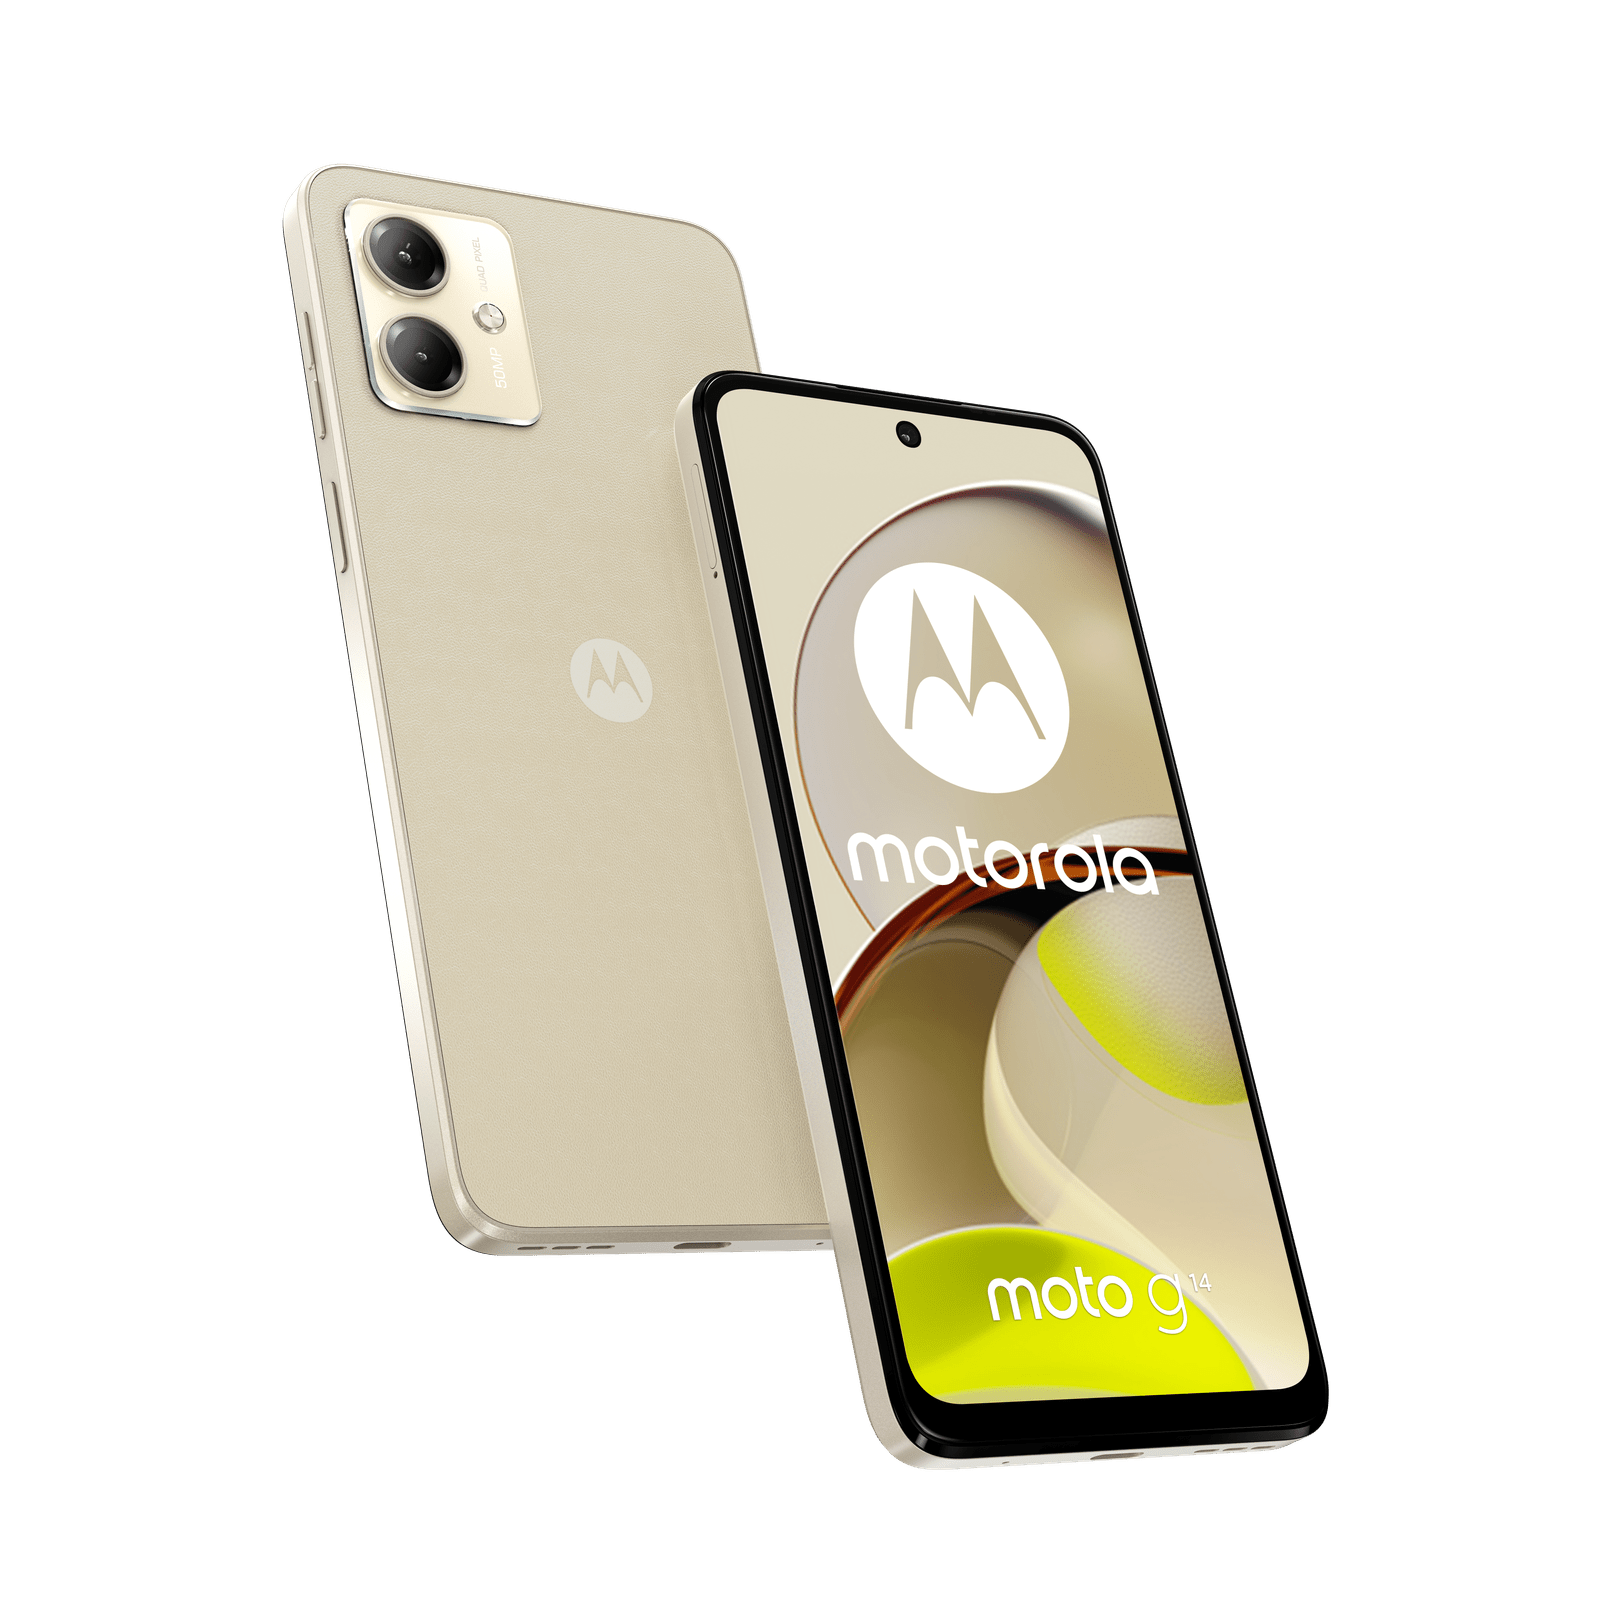 Motorola introduces moto g14 with vegan leather design under 10K in two new colours - Pale Lilac and Butter Cream